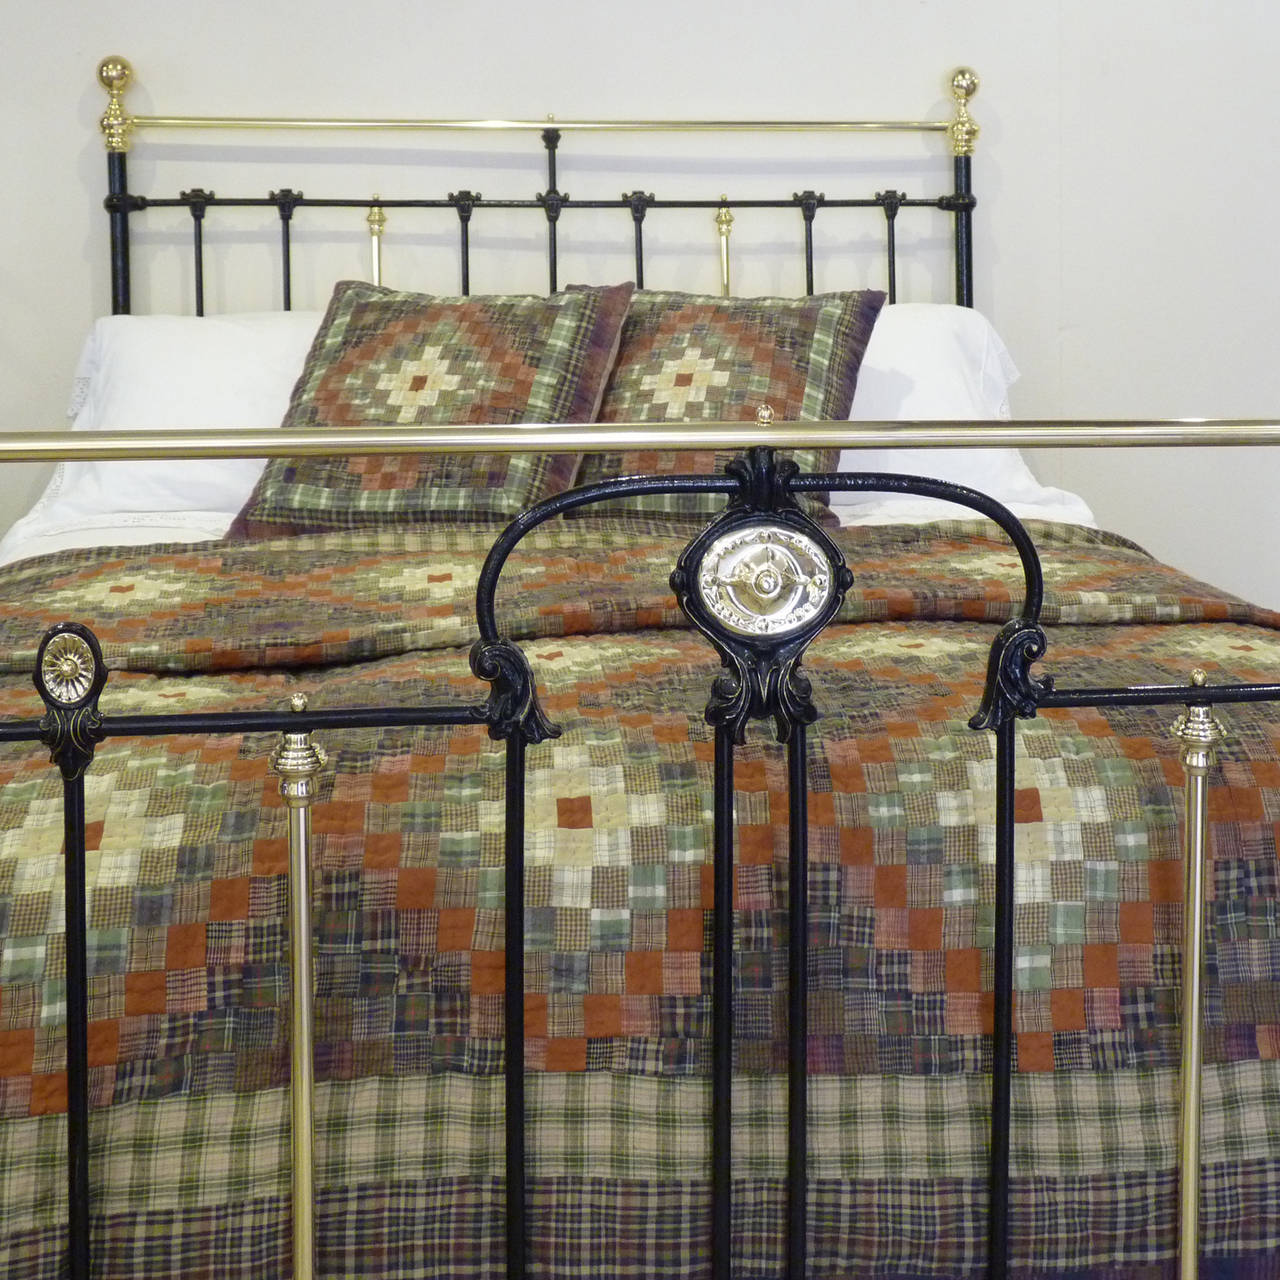 English Art Nouveau Style Brass and Iron Bedstead